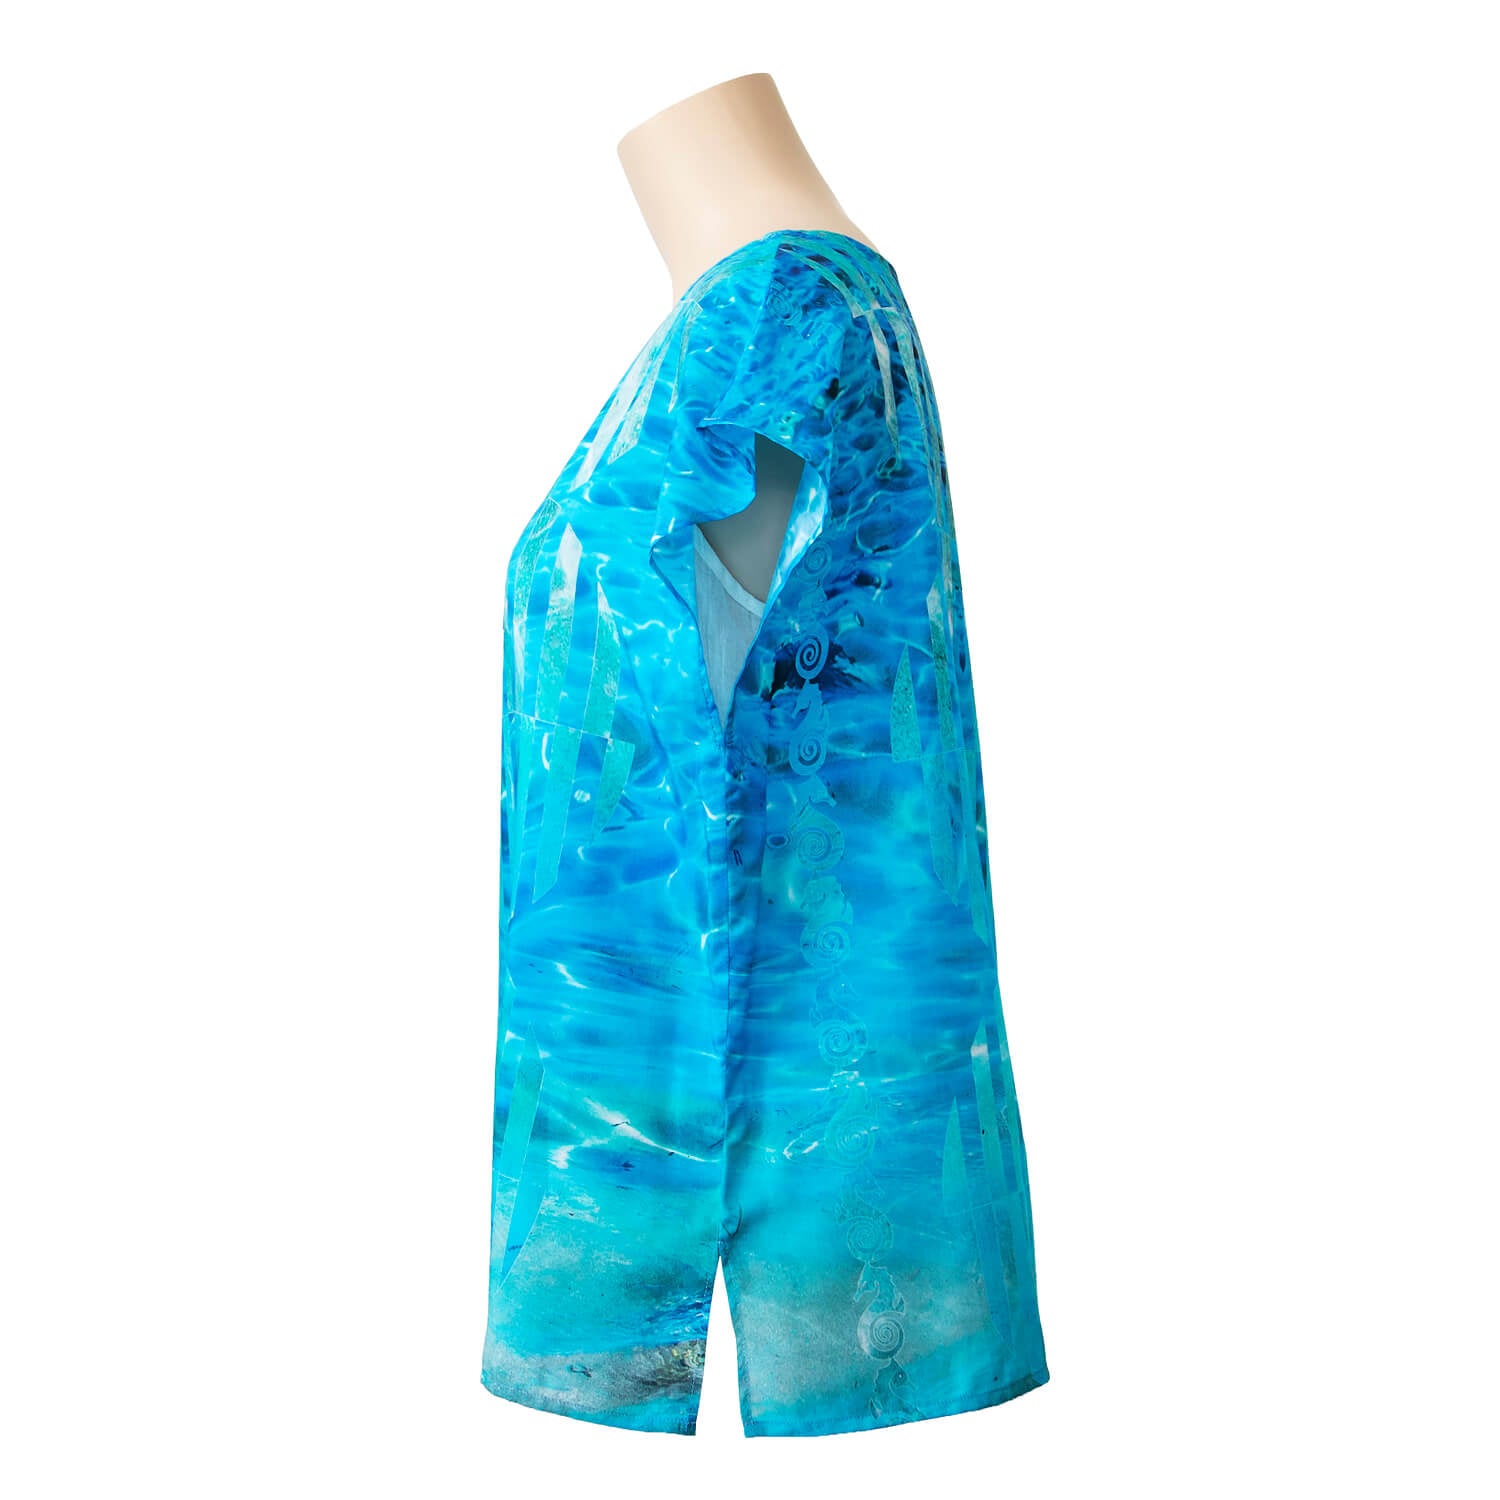 LHS view of clear blue silk cotton top by seahorse silks